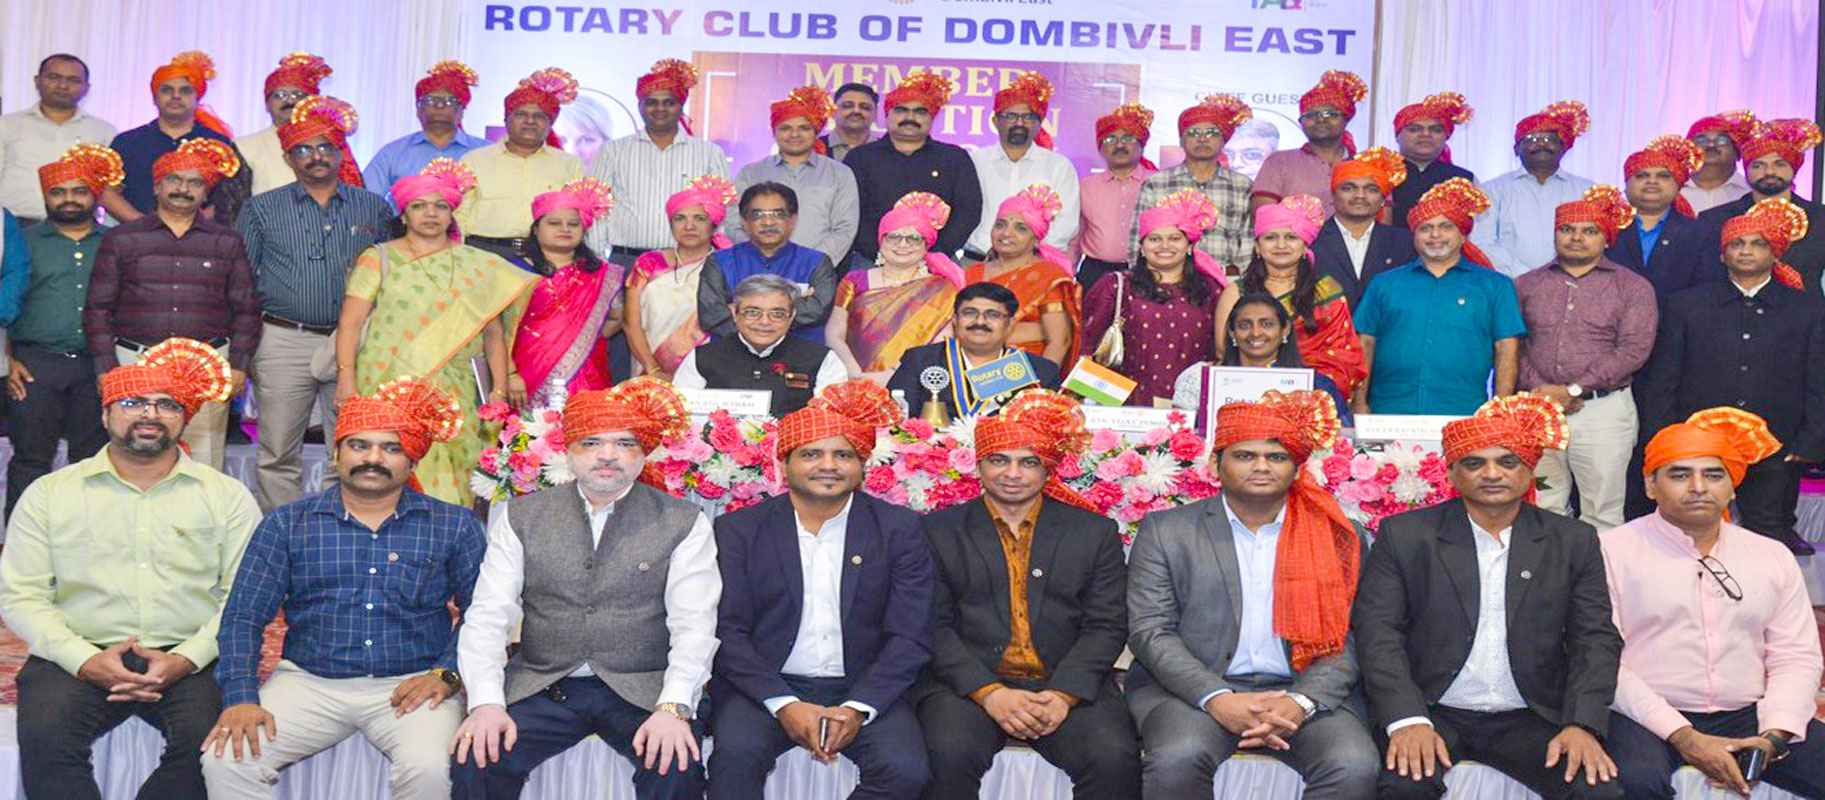 DG Kailash Jethani and RC Dombivli East president Vijay Dumbre with the newly inducted members. 